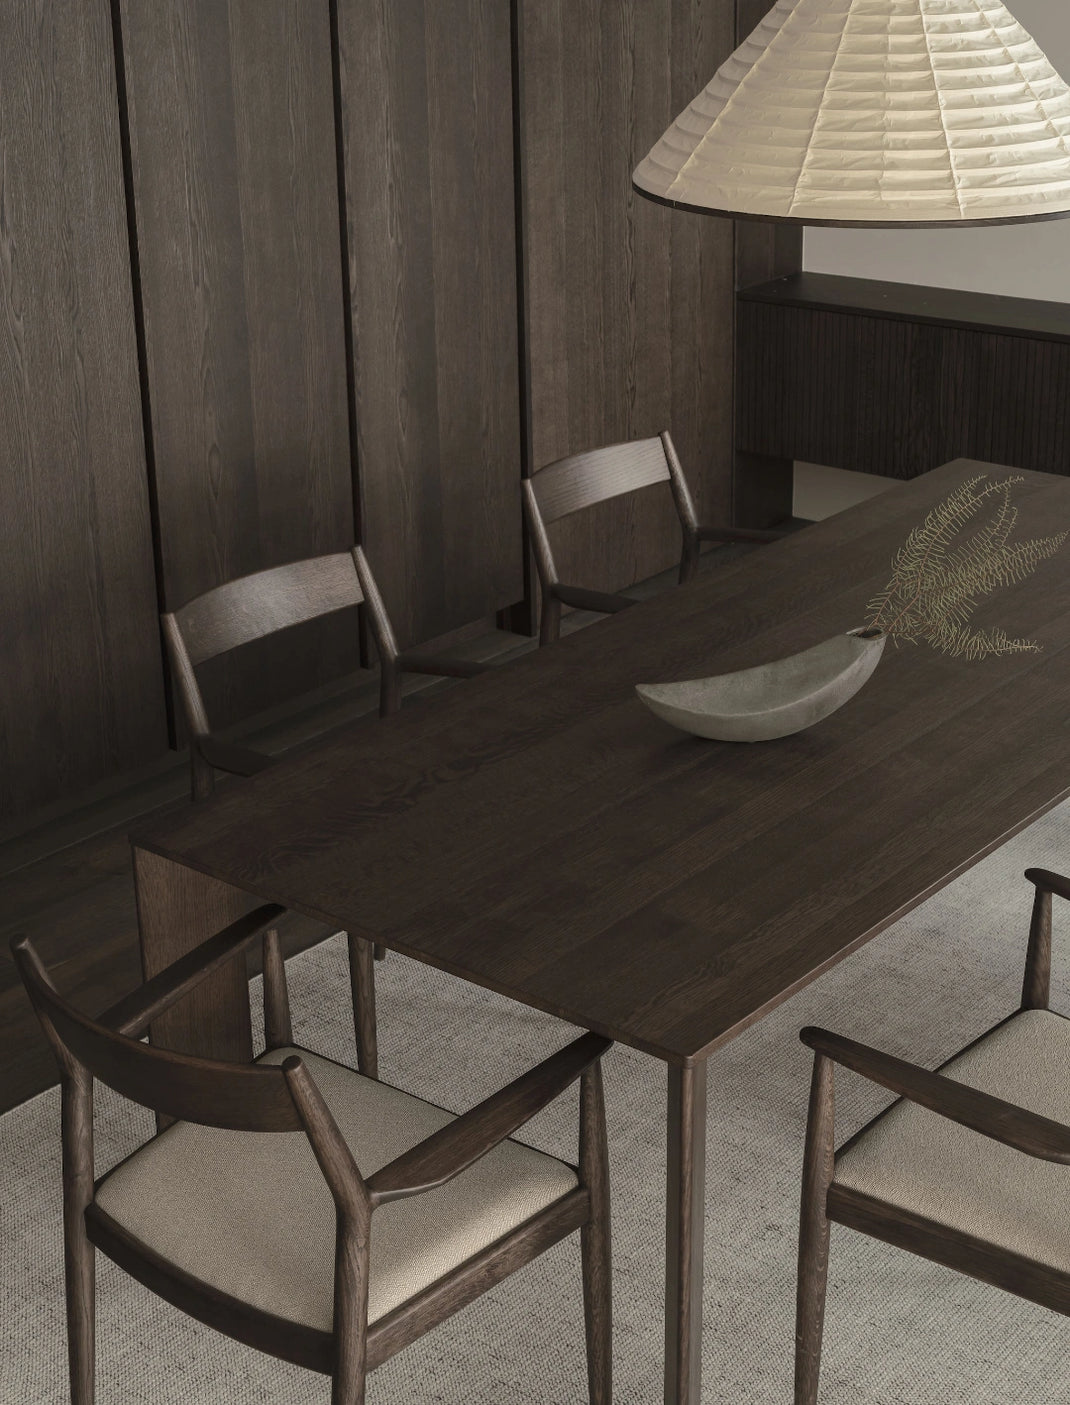 A-DT02 Dining Tables